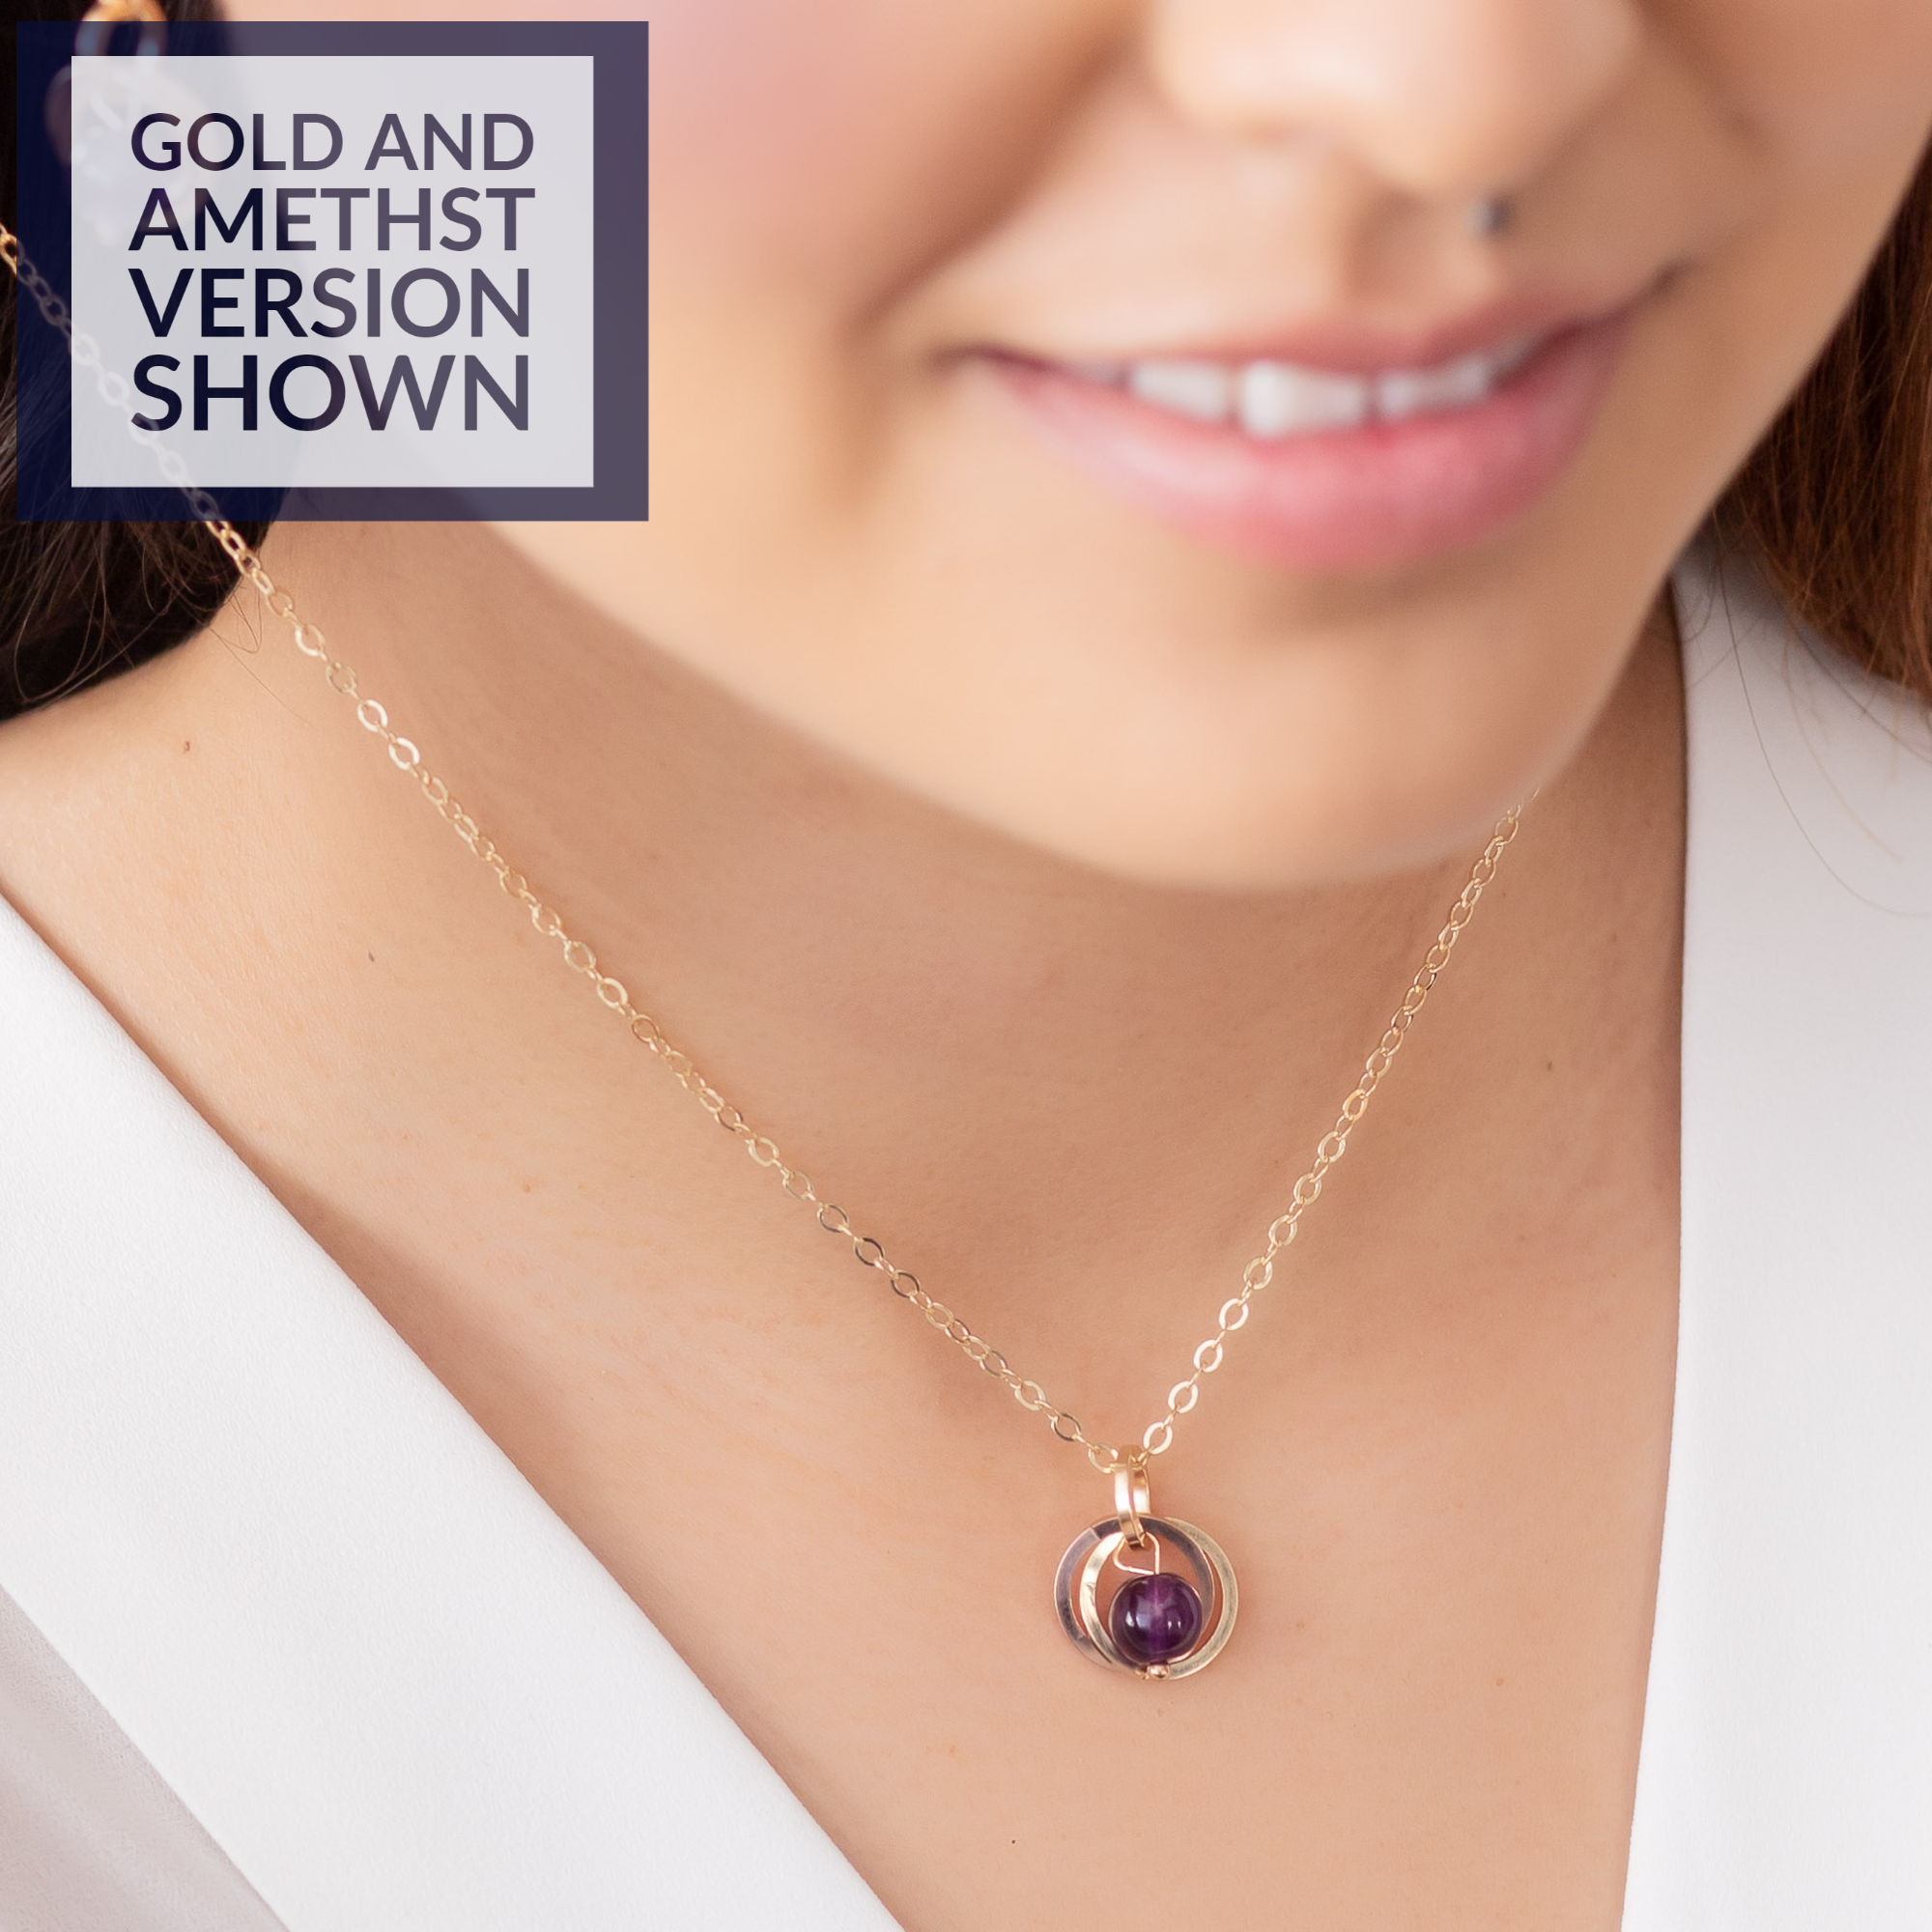 Dark Purple Genuine 8MM Amethyst Gemstone Pendant Necklace in 14K Yellow and Rose Gold Fill